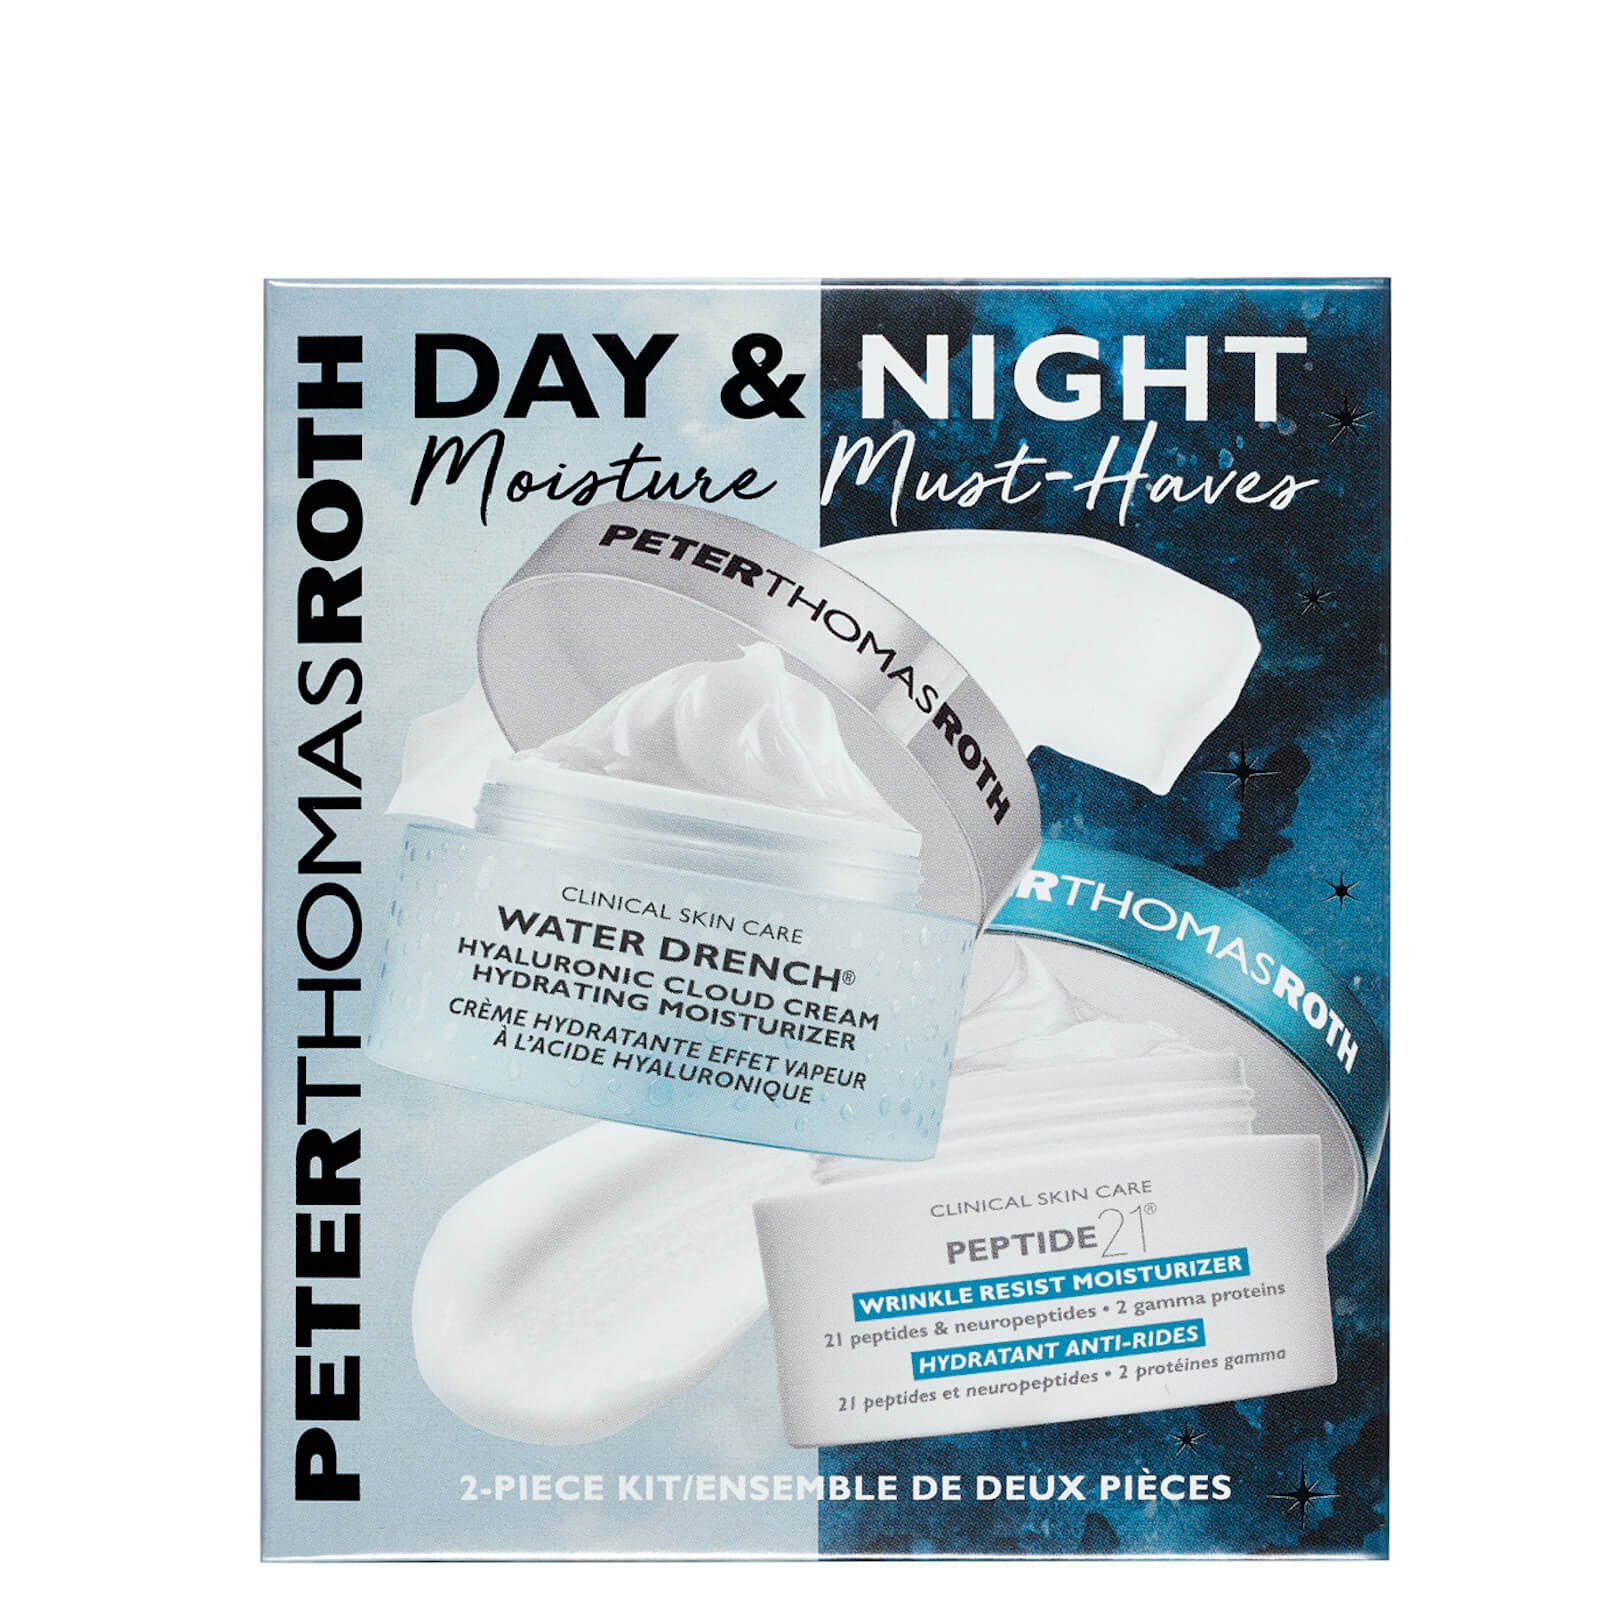 Peter Thomas Roth Beauty sets DAY AND NIGHT MOISTURE MUST-HAVE DUO (WORTH $69.00)